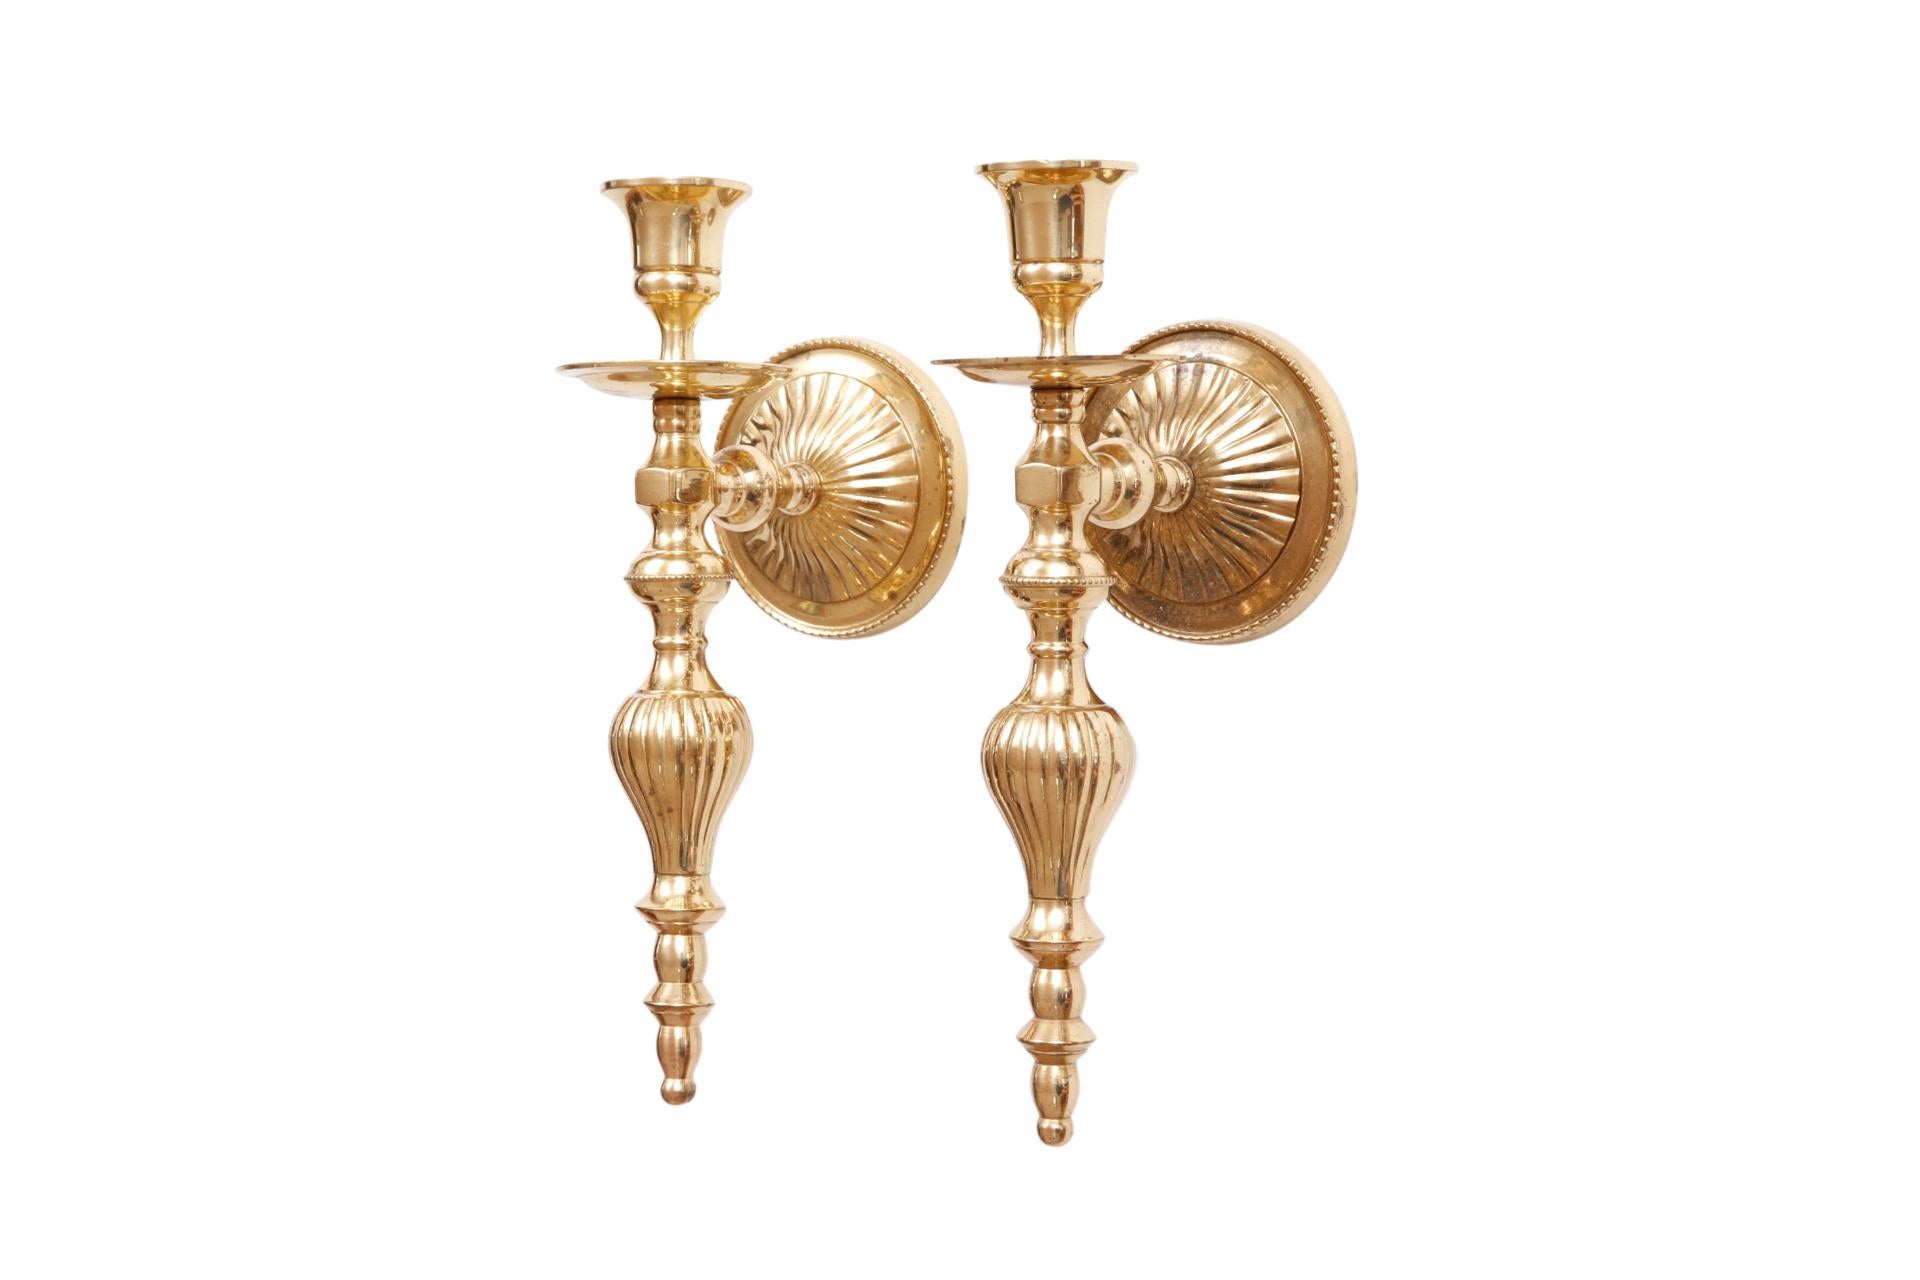 A pair of traditional brass candlestick sconces. Sleek capitals and drip pans are balanced with turned, reeded columns. Set on round reeded back plates. Dimensions per sconce.